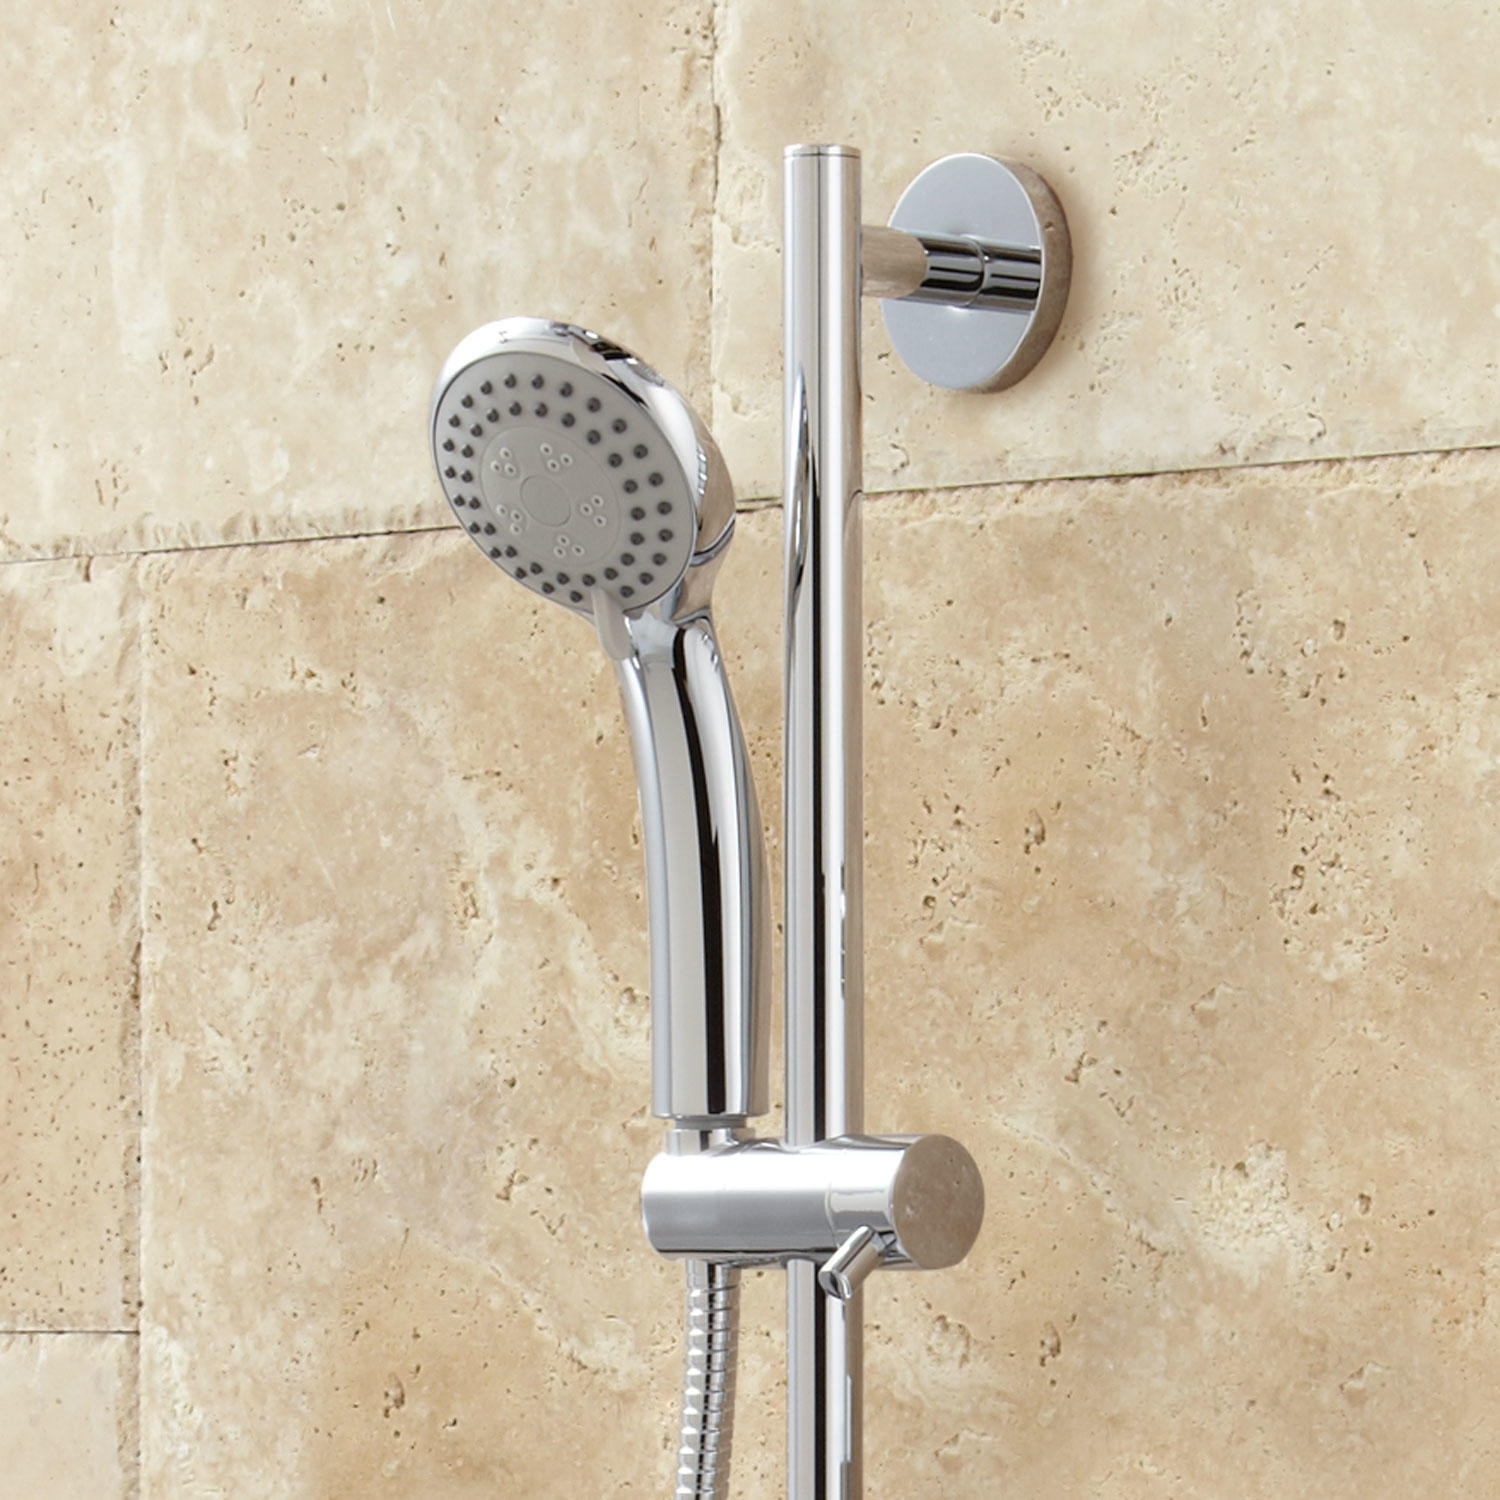 Picture Of Bathroom Showers
 Isola Thermostatic Shower System with Wall Shower Hand